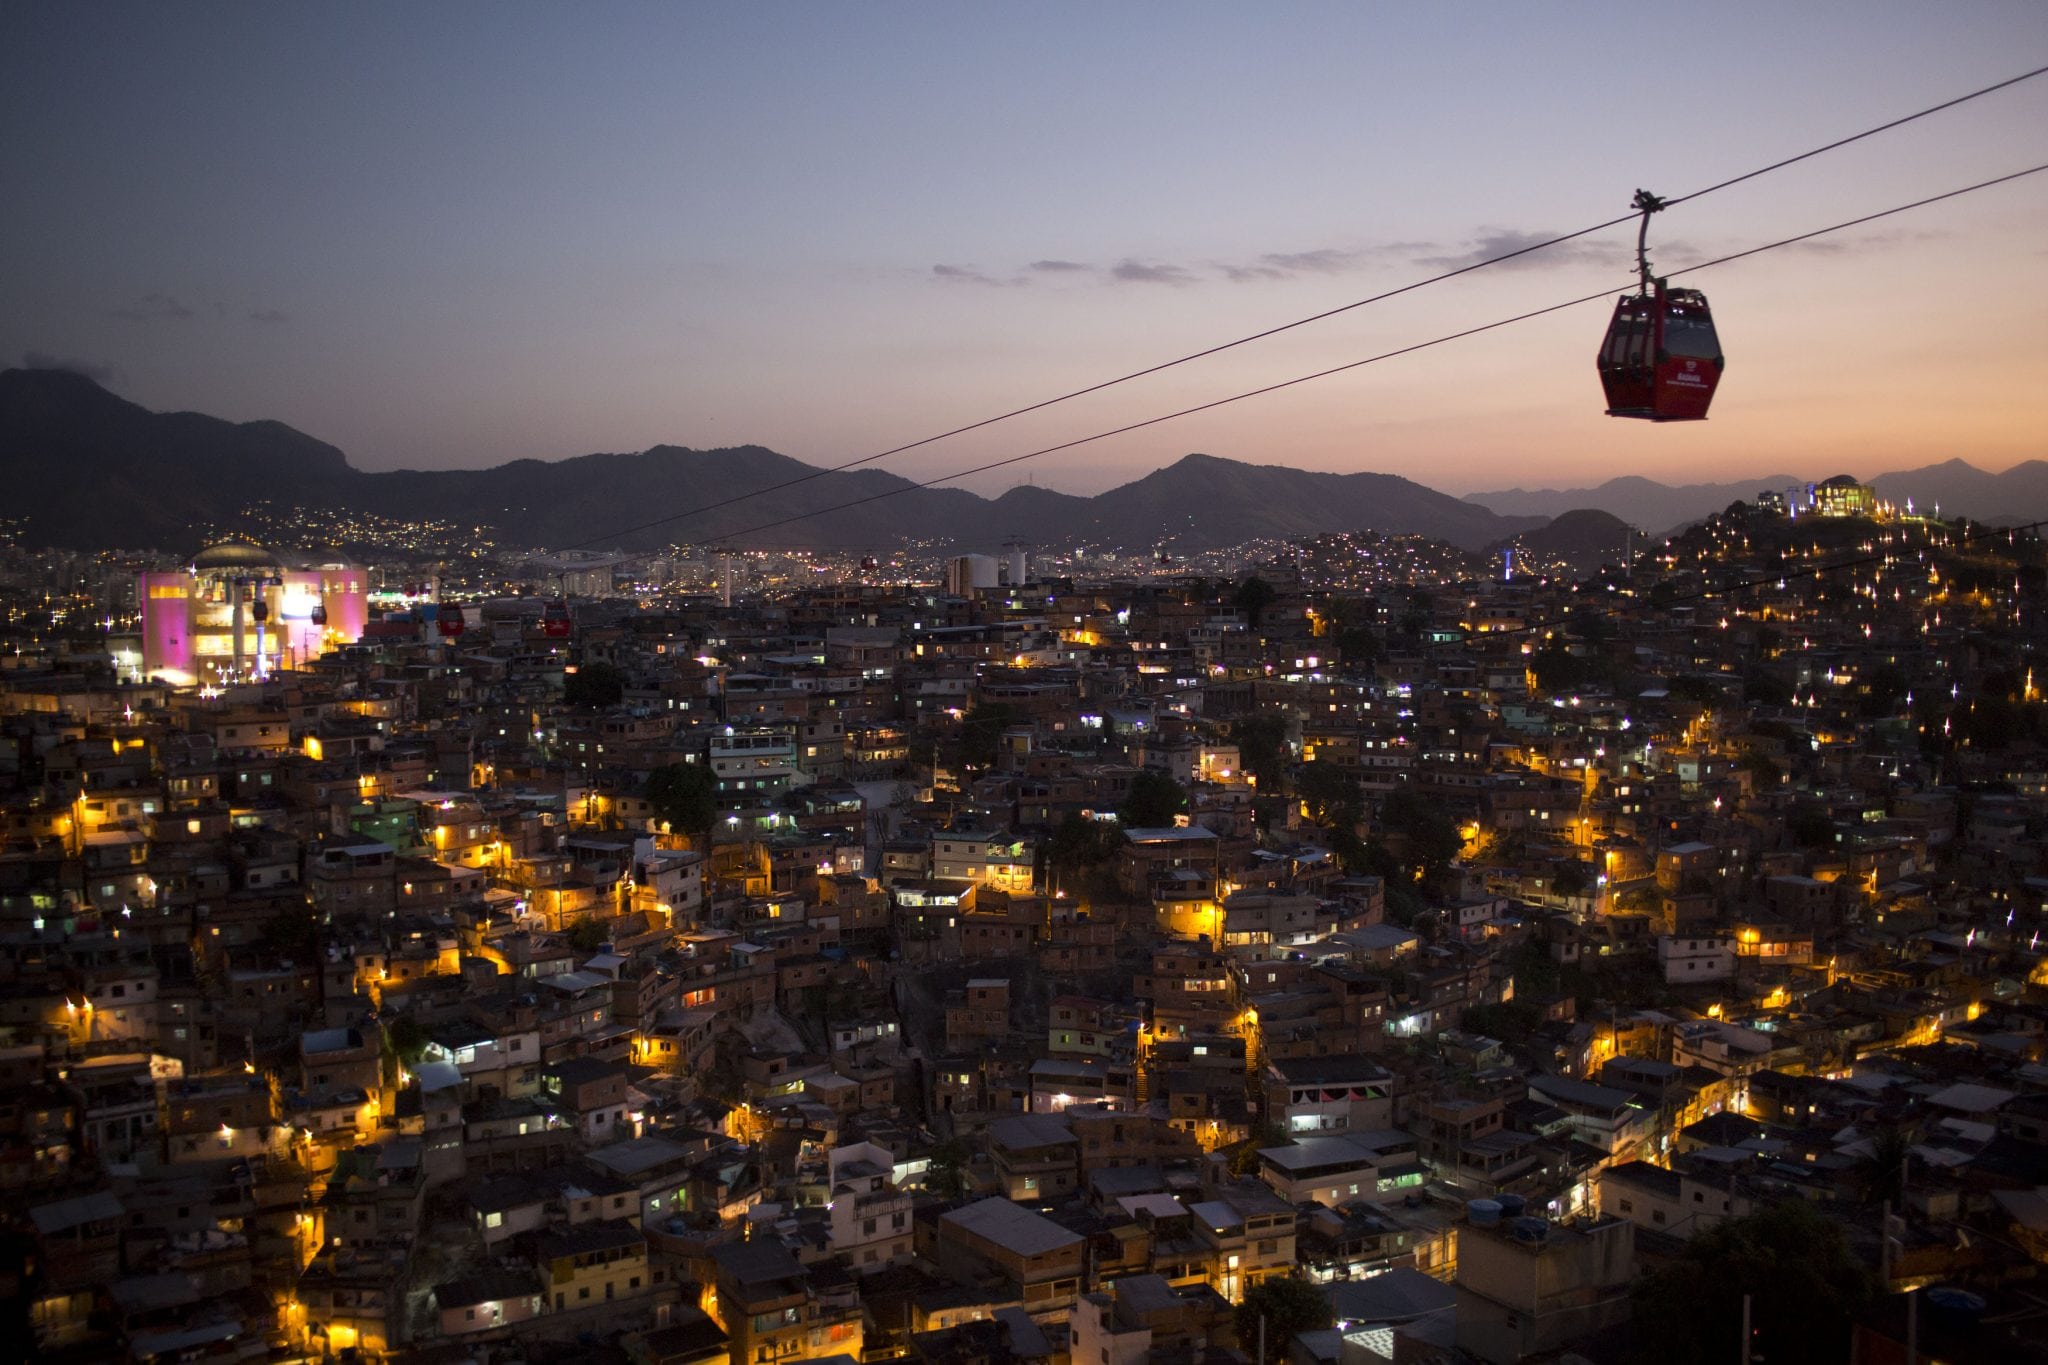 n this May 10, 2013 photo, homes are lit at night as cable-cars move commuters over the Complexo do Alemao complex of shantytowns in Rio de Janeiro, Brazil. The cable-car system linking six of its hilltops over a 3.5-kilometer (2.3-mile) route has become a popular tourist attraction. 